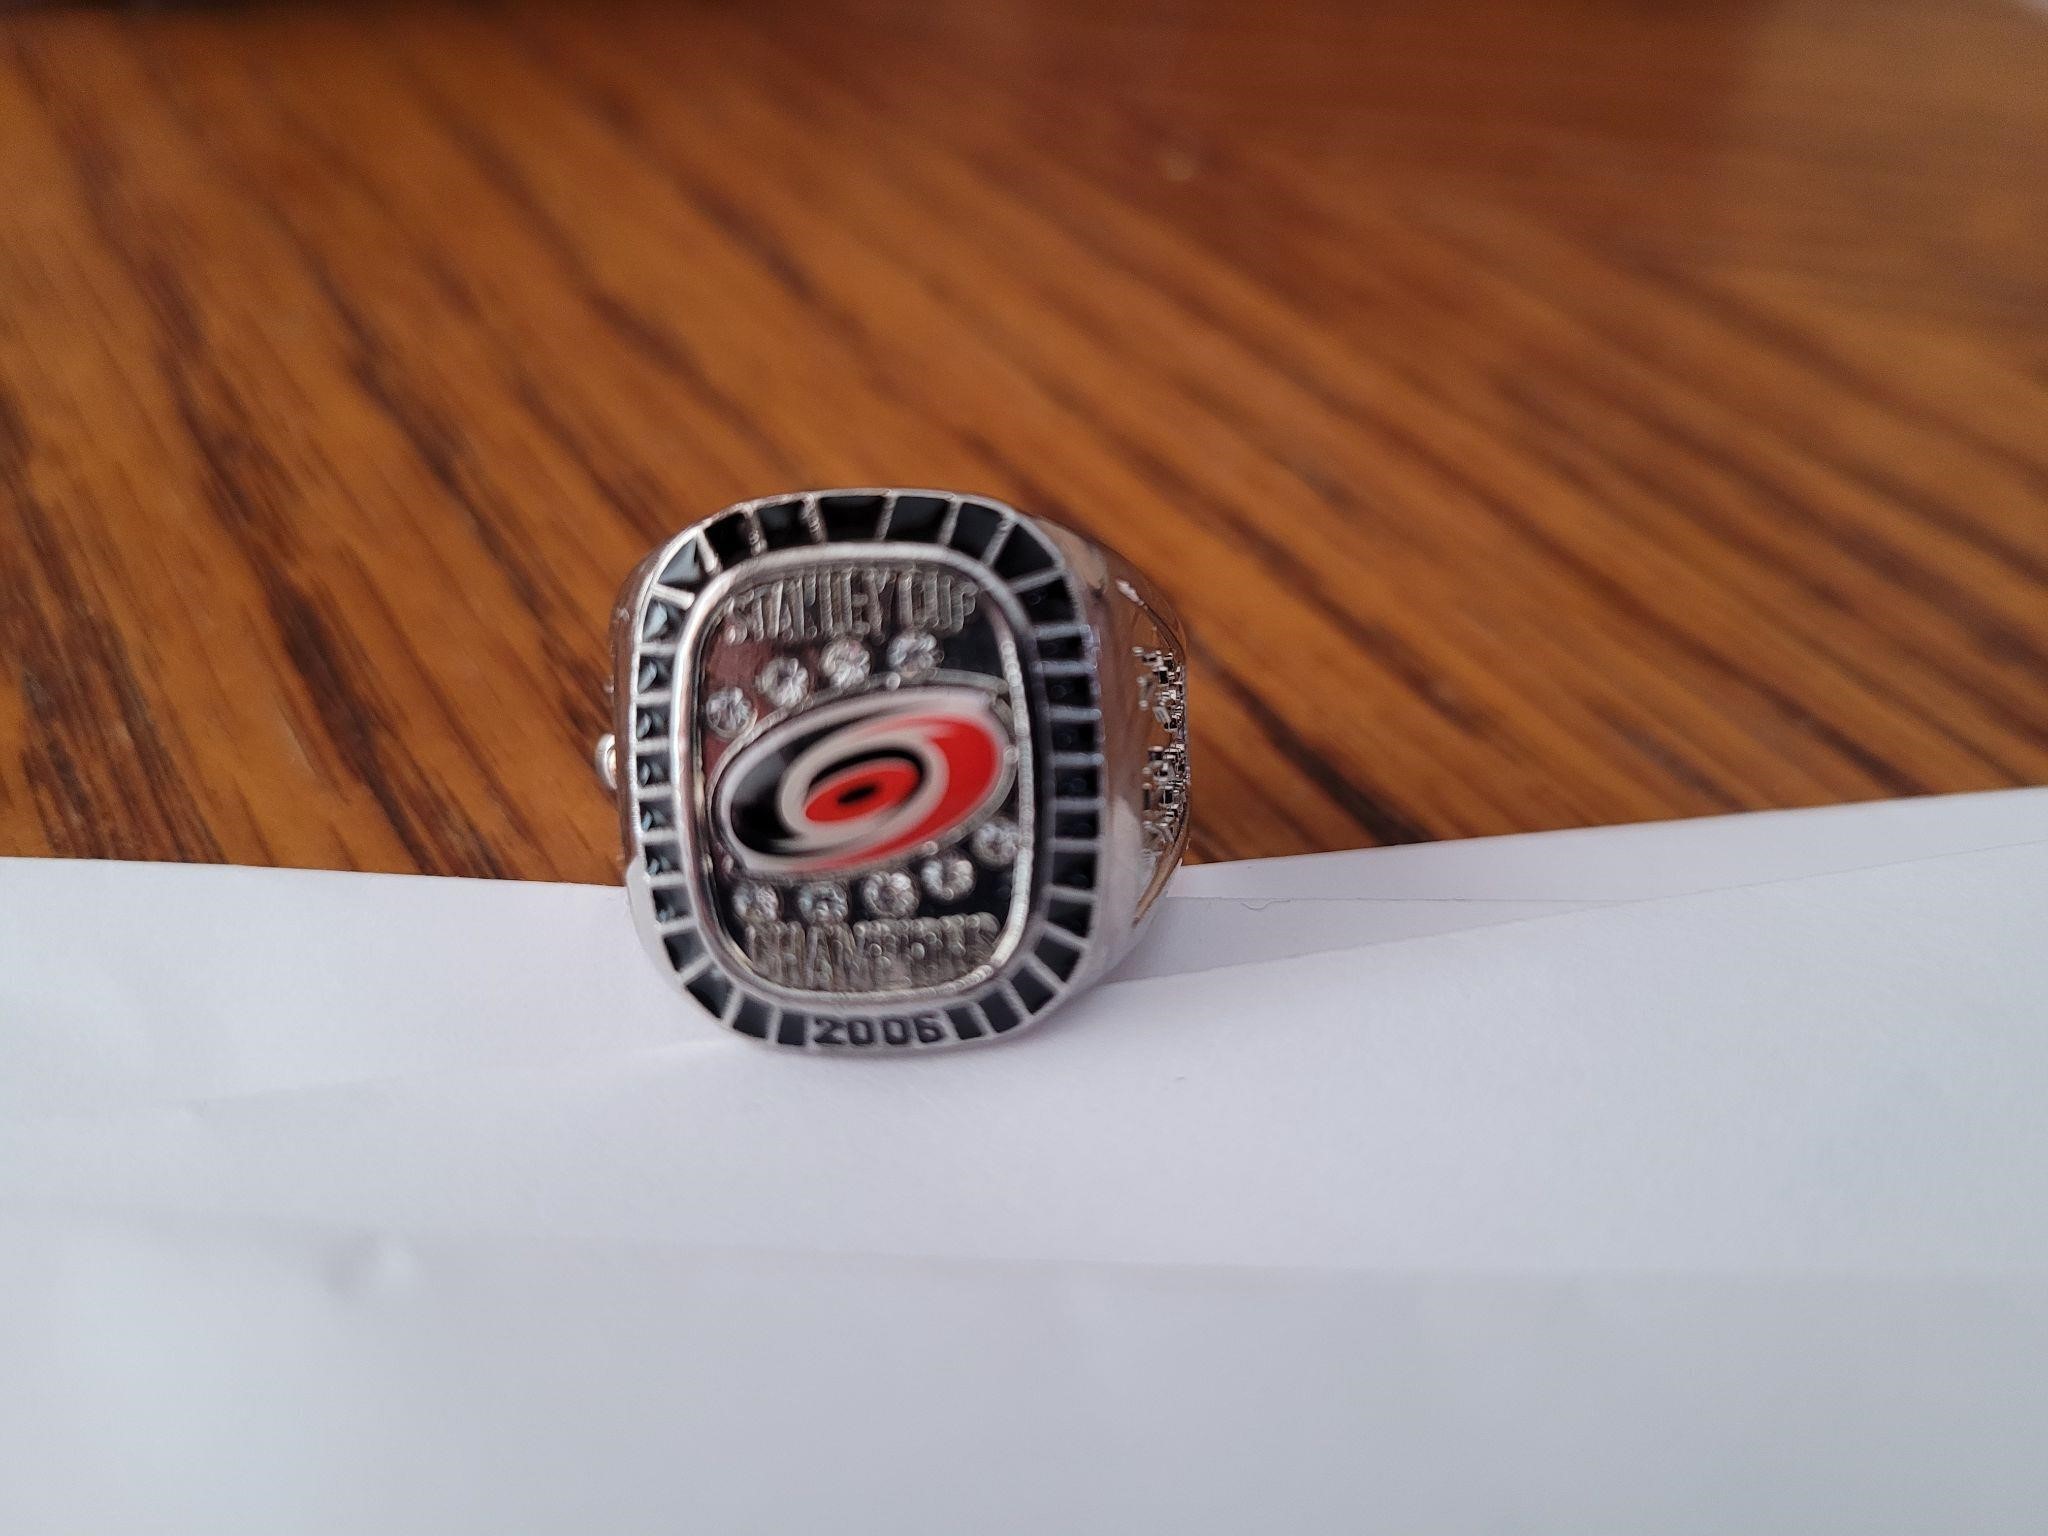 Replica Stanley Cup Ring